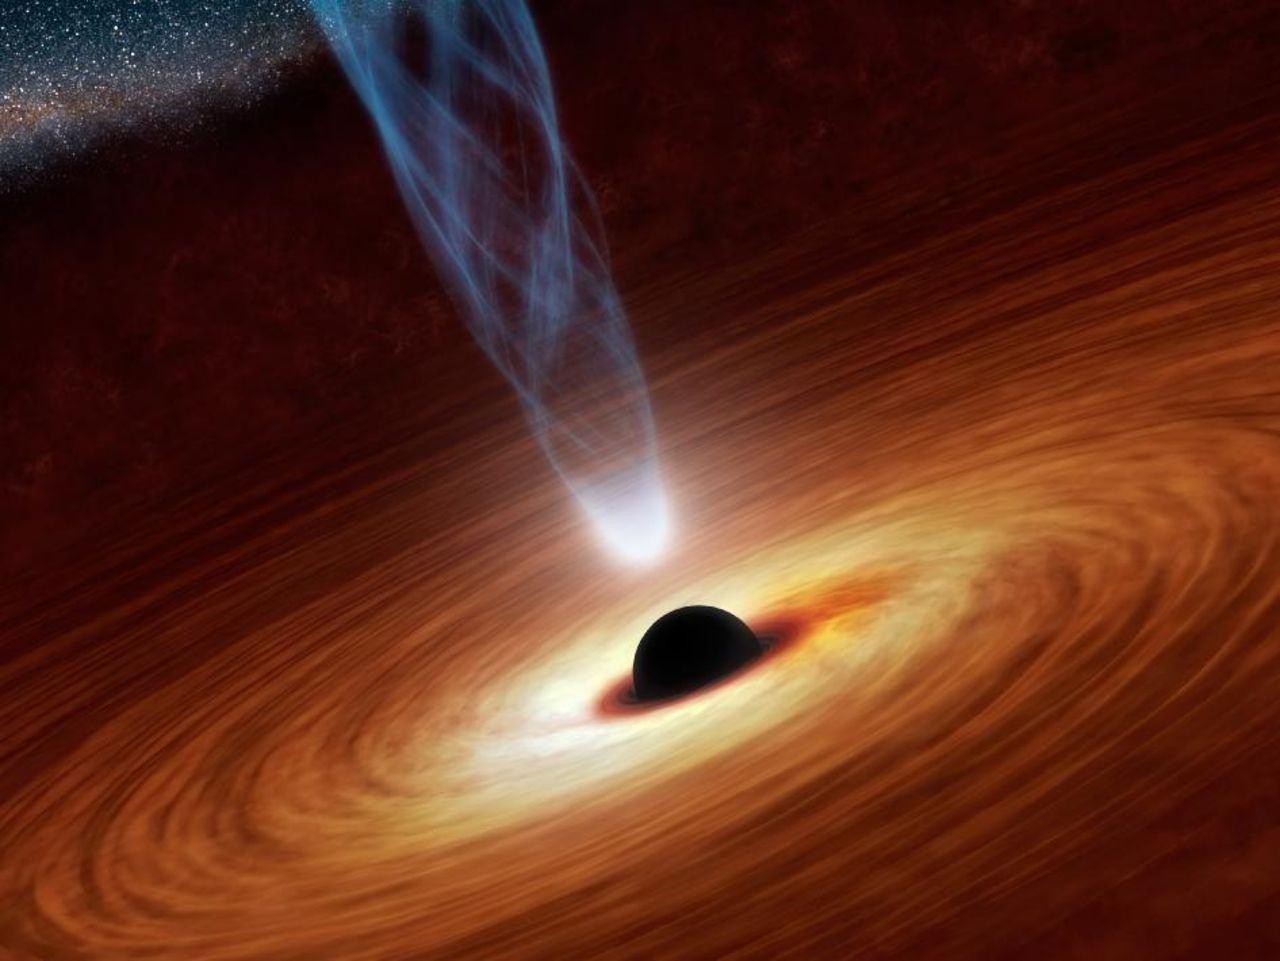 An artist's impression of what a black hole might look like. In February, researchers in China said they had spotted a super-massive black hole 12 billion times the size of the sun.